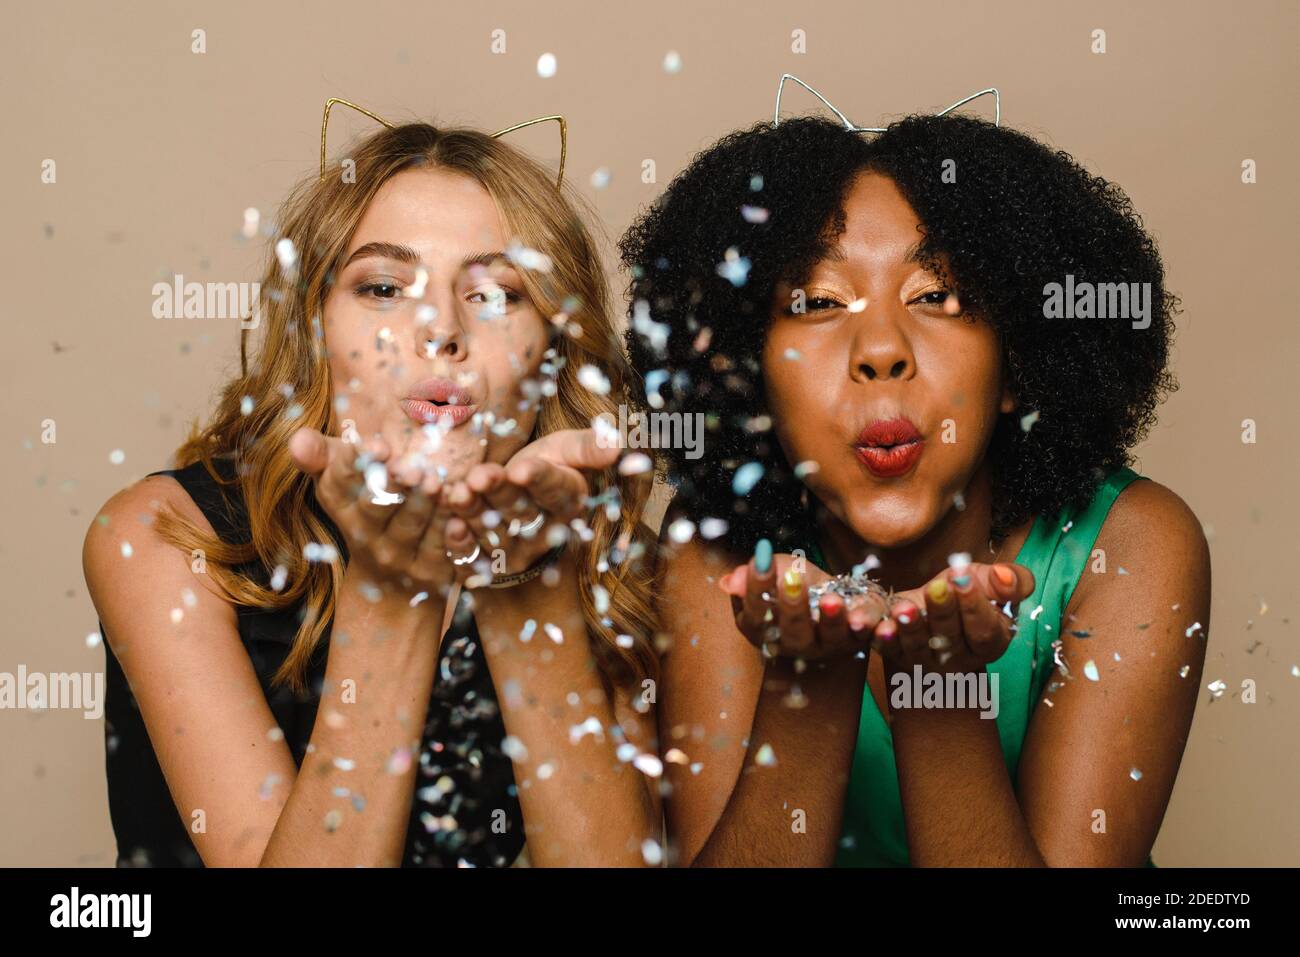 Black and Caucasian beautiful young women blowing confetti into the camera on a beige background. Celebrating Christmas in the studio. Party, event and celebration concept. Stock Photo